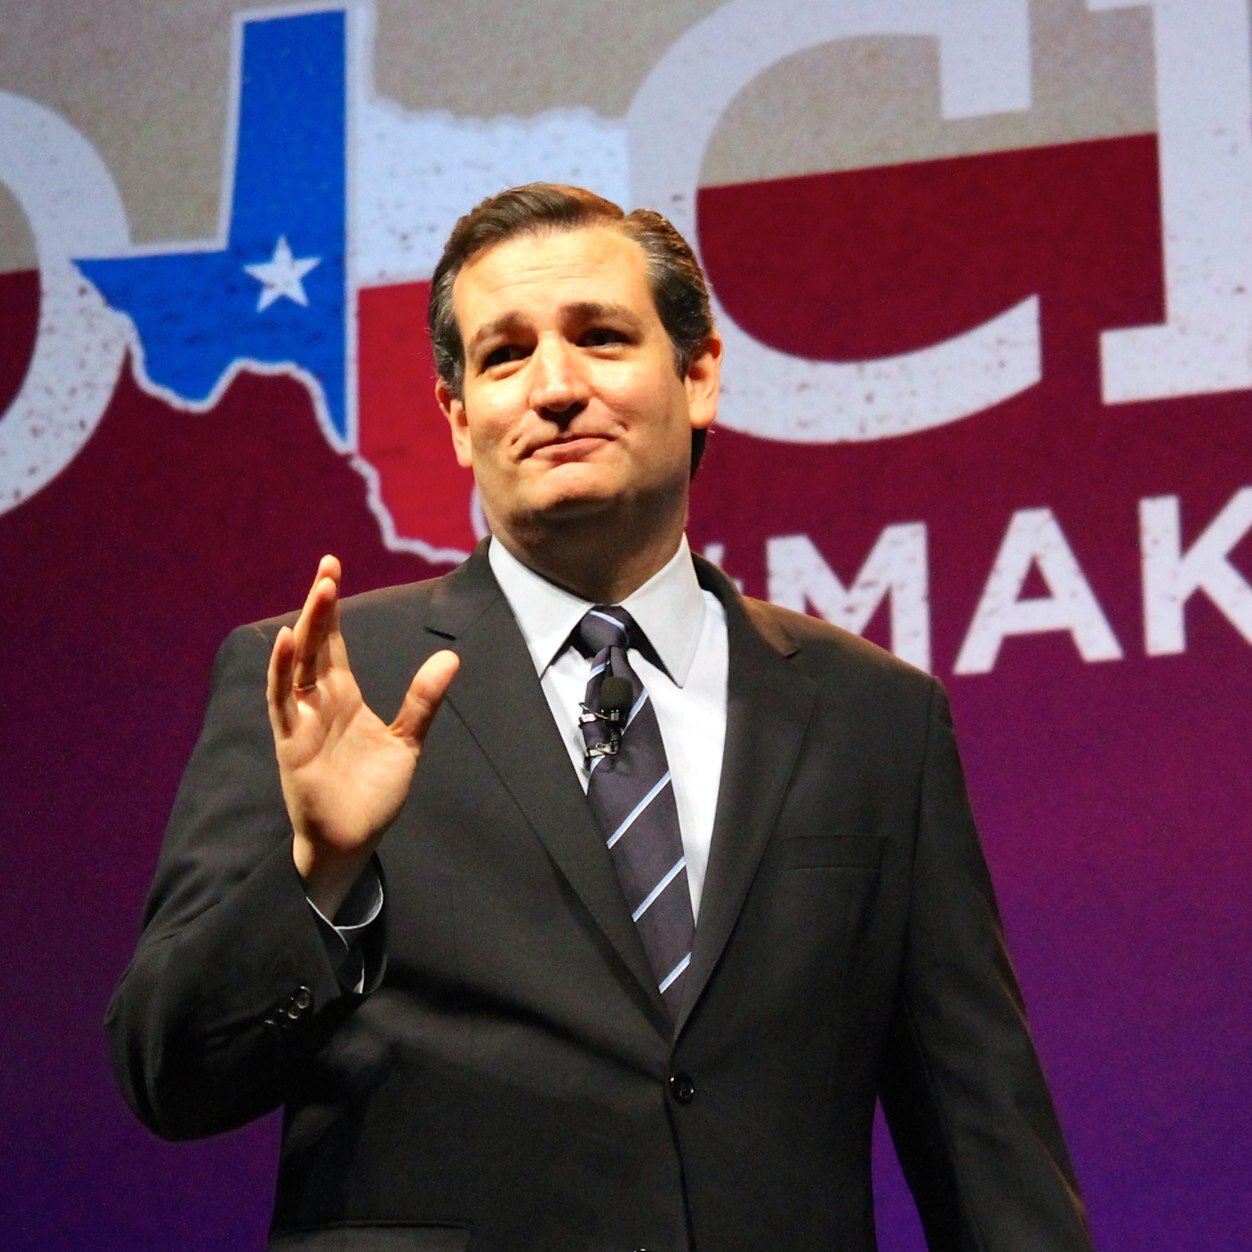 Tickets for Cruz rally require registration